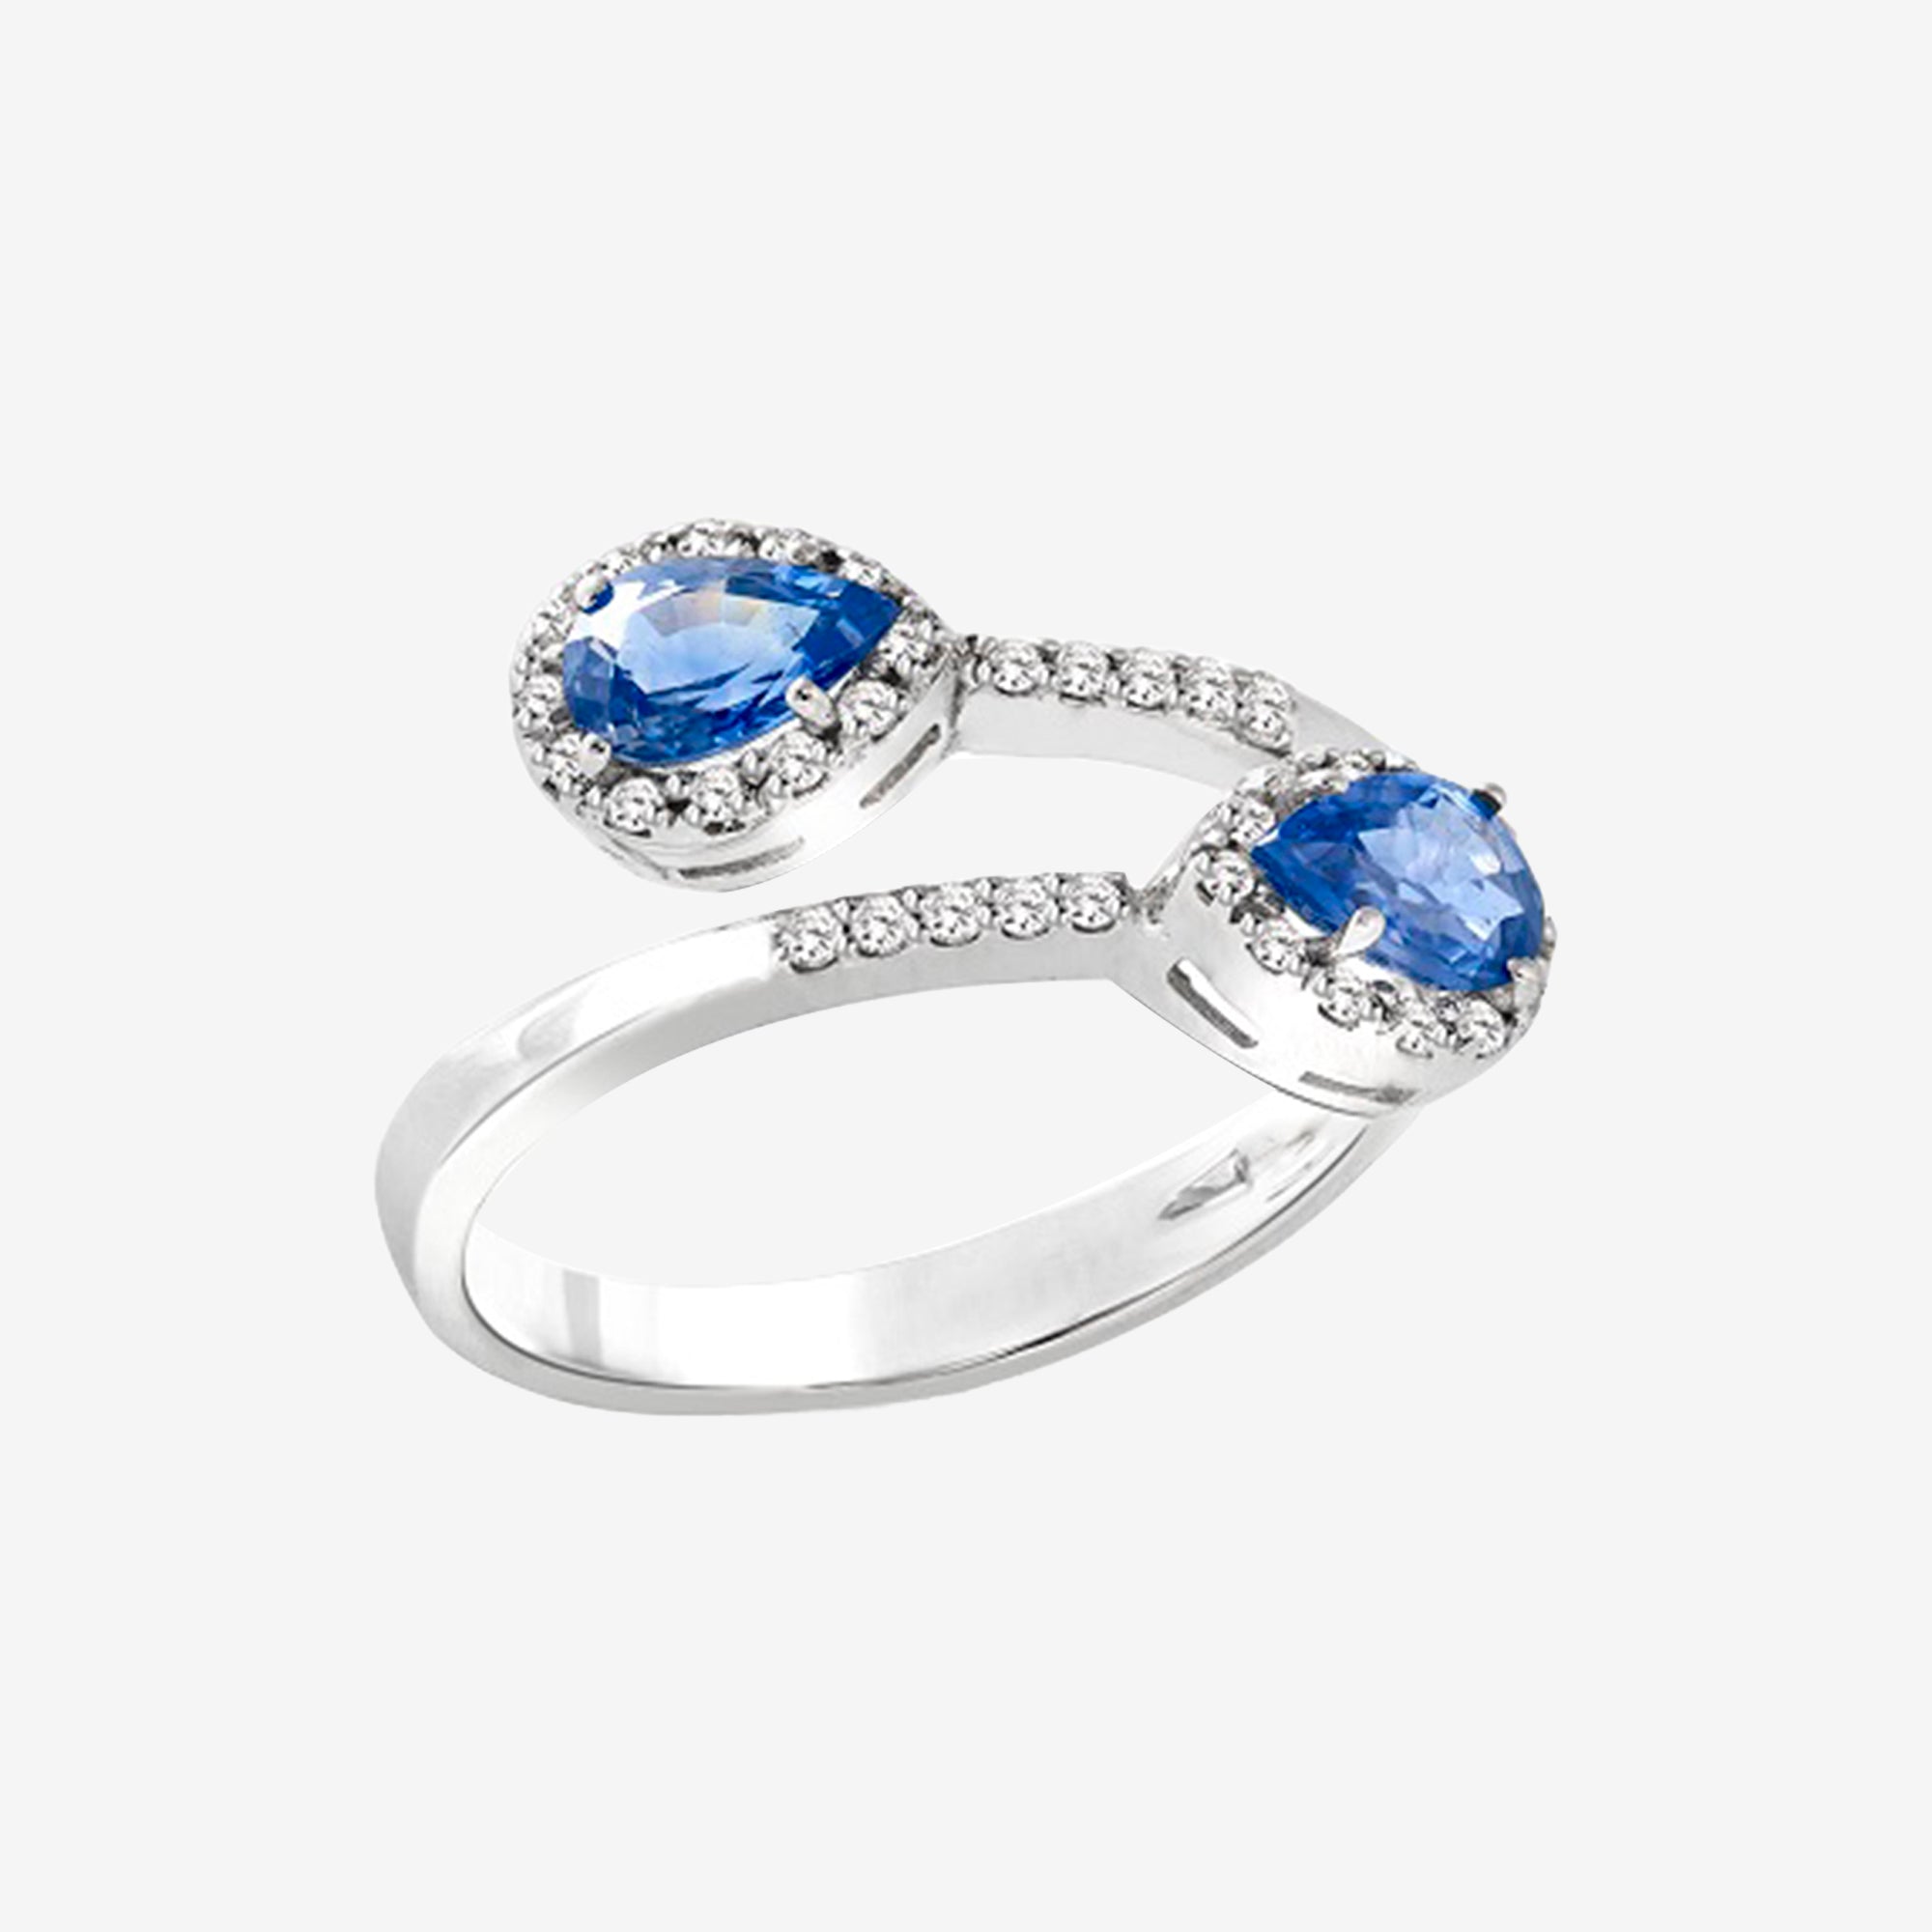 Double Droplet Ring with Sapphires and Diamonds